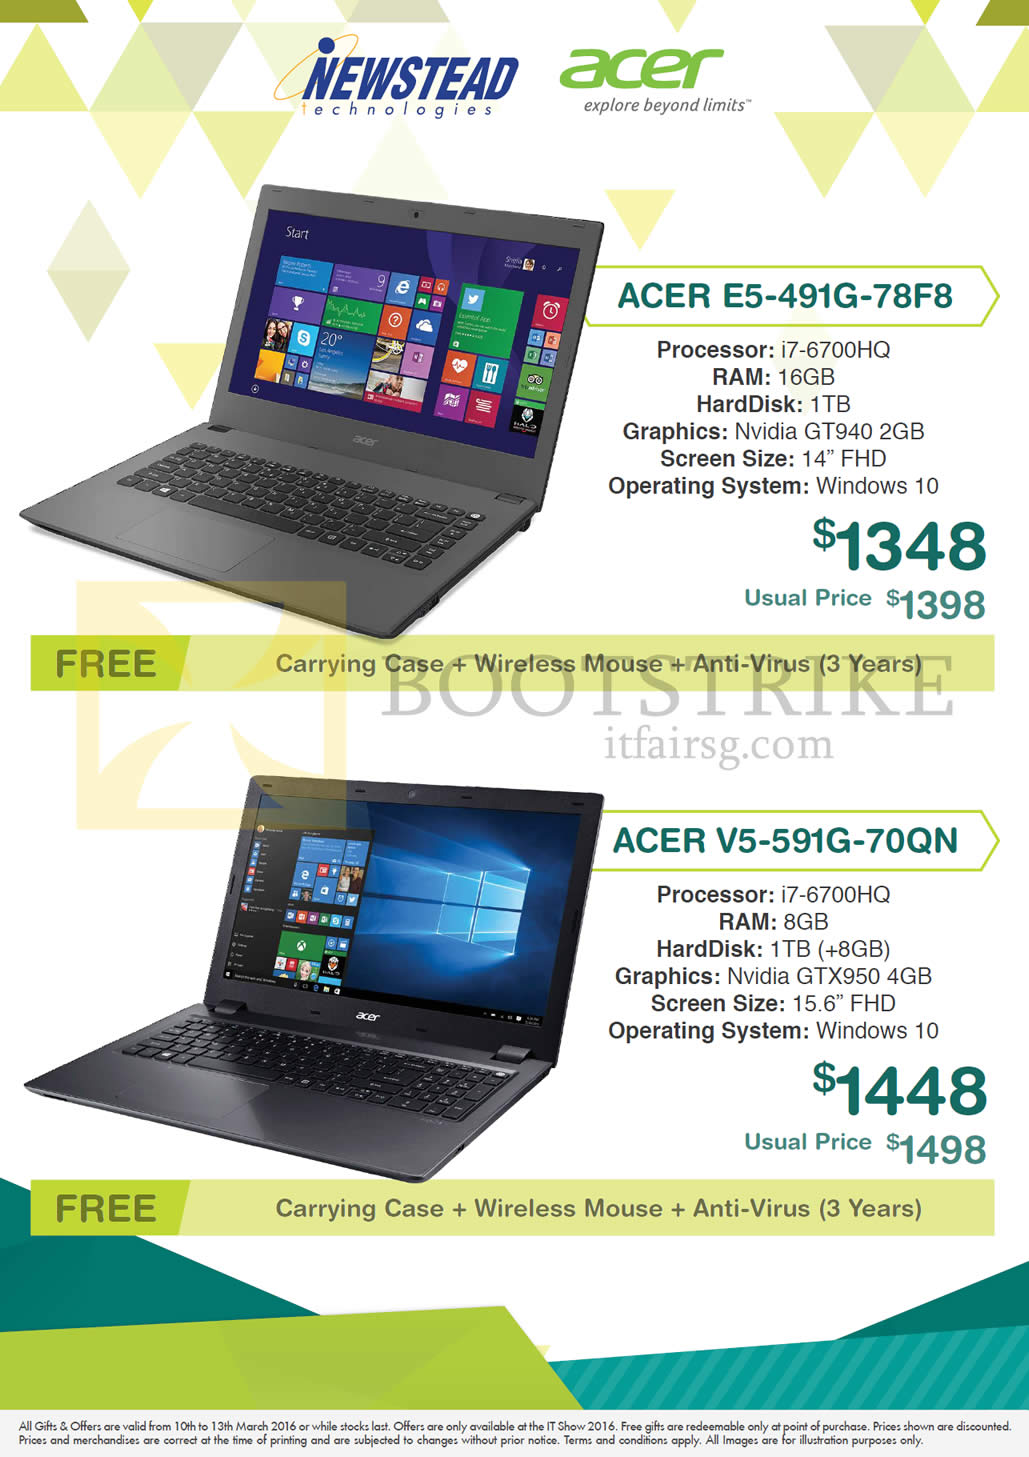 IT SHOW 2016 price list image brochure of Acer Newstead Notebooks E5-491G-78F8, V5-591G-70QN